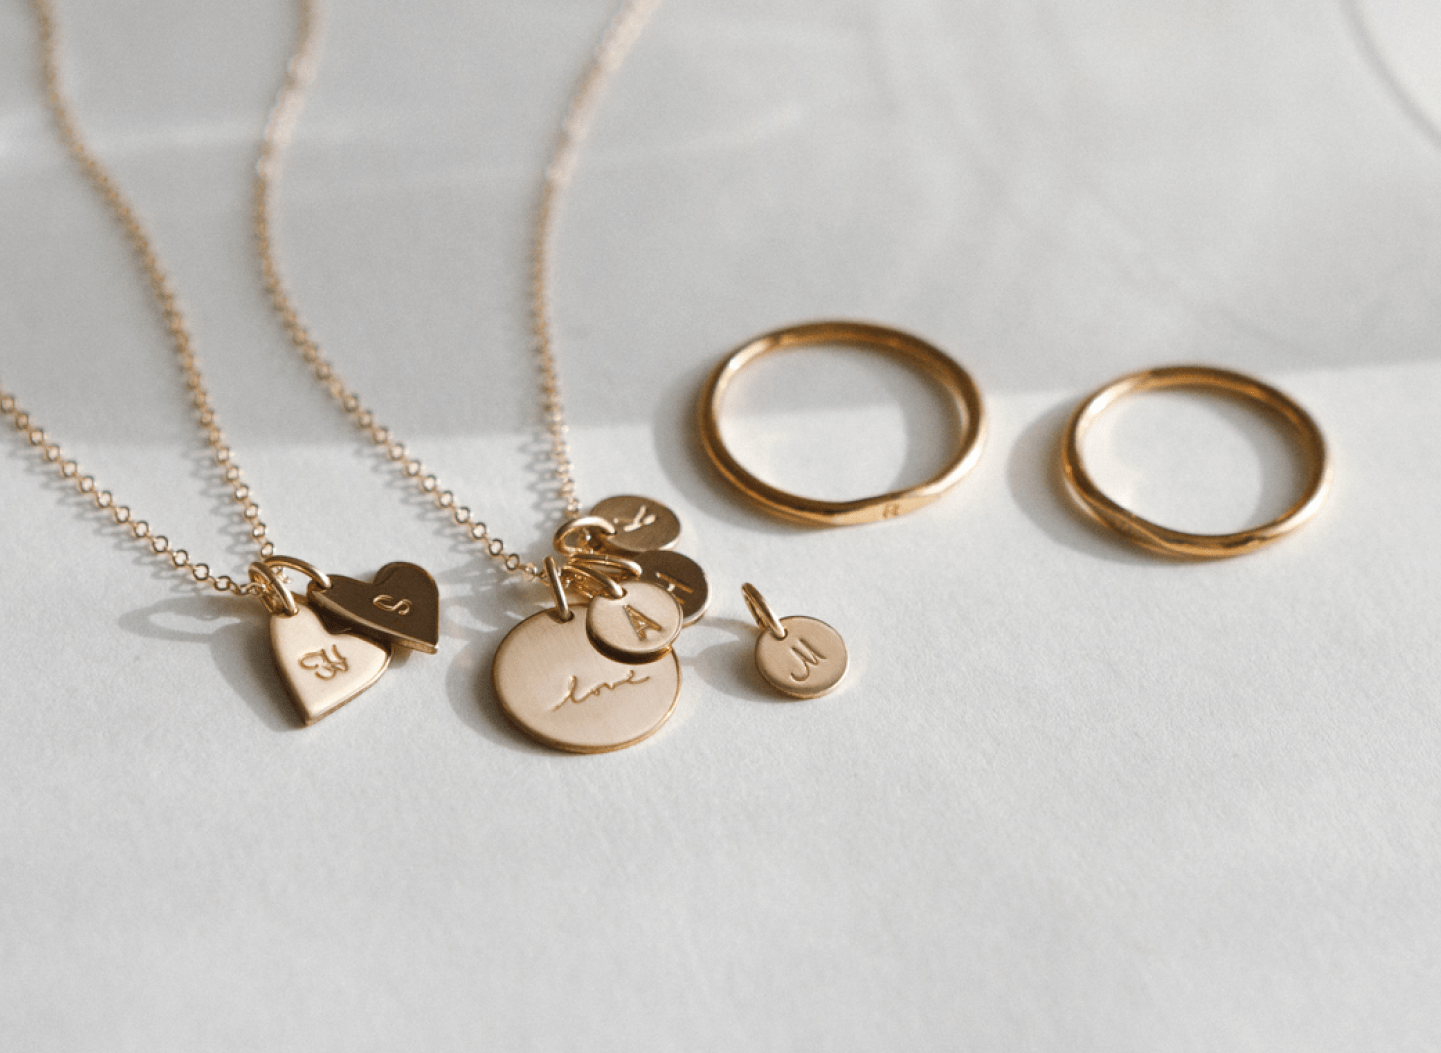 From left: Maude Heart Necklace, Bennett Necklace & Extra Yue Tag, Micro Signet Ring